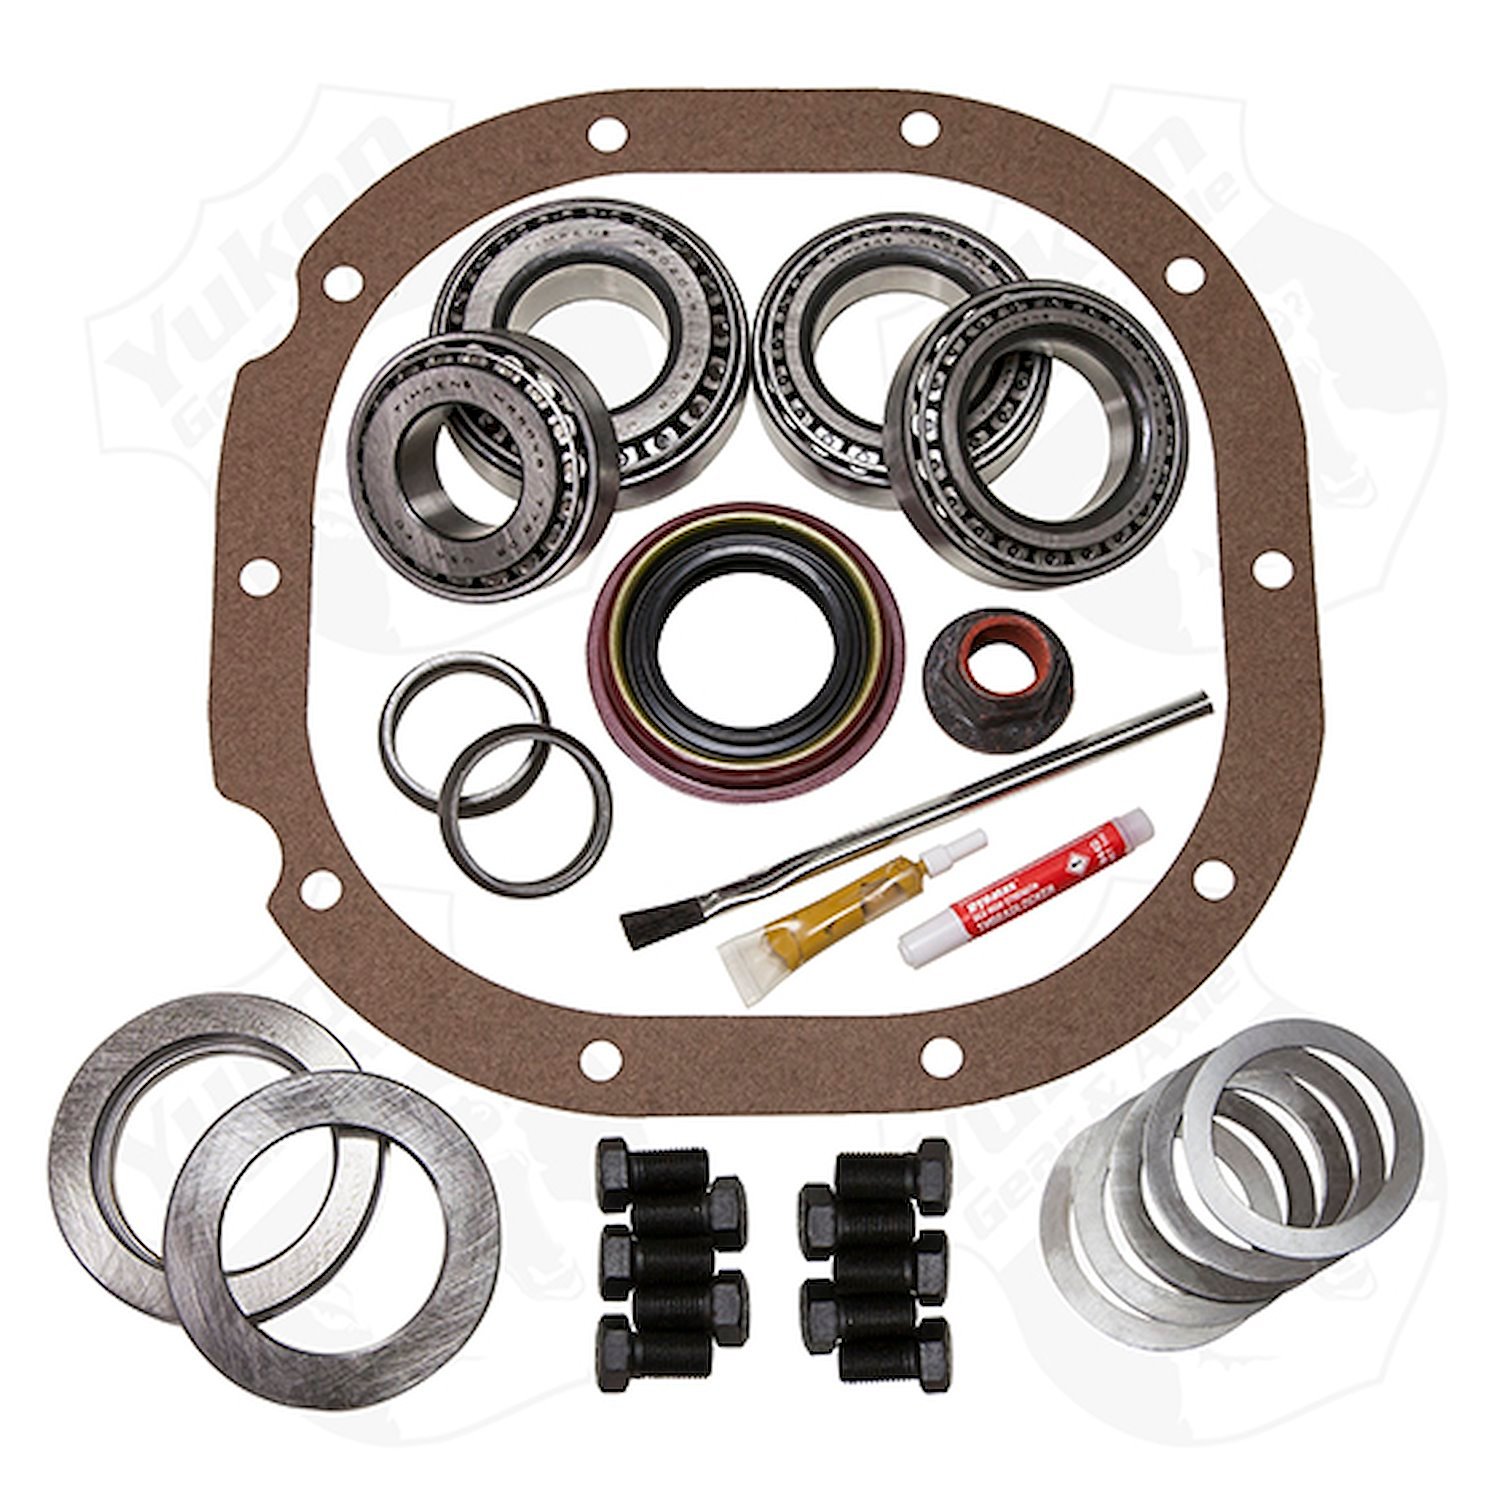 Master Overhaul Kit For Ford 8 in. Irs